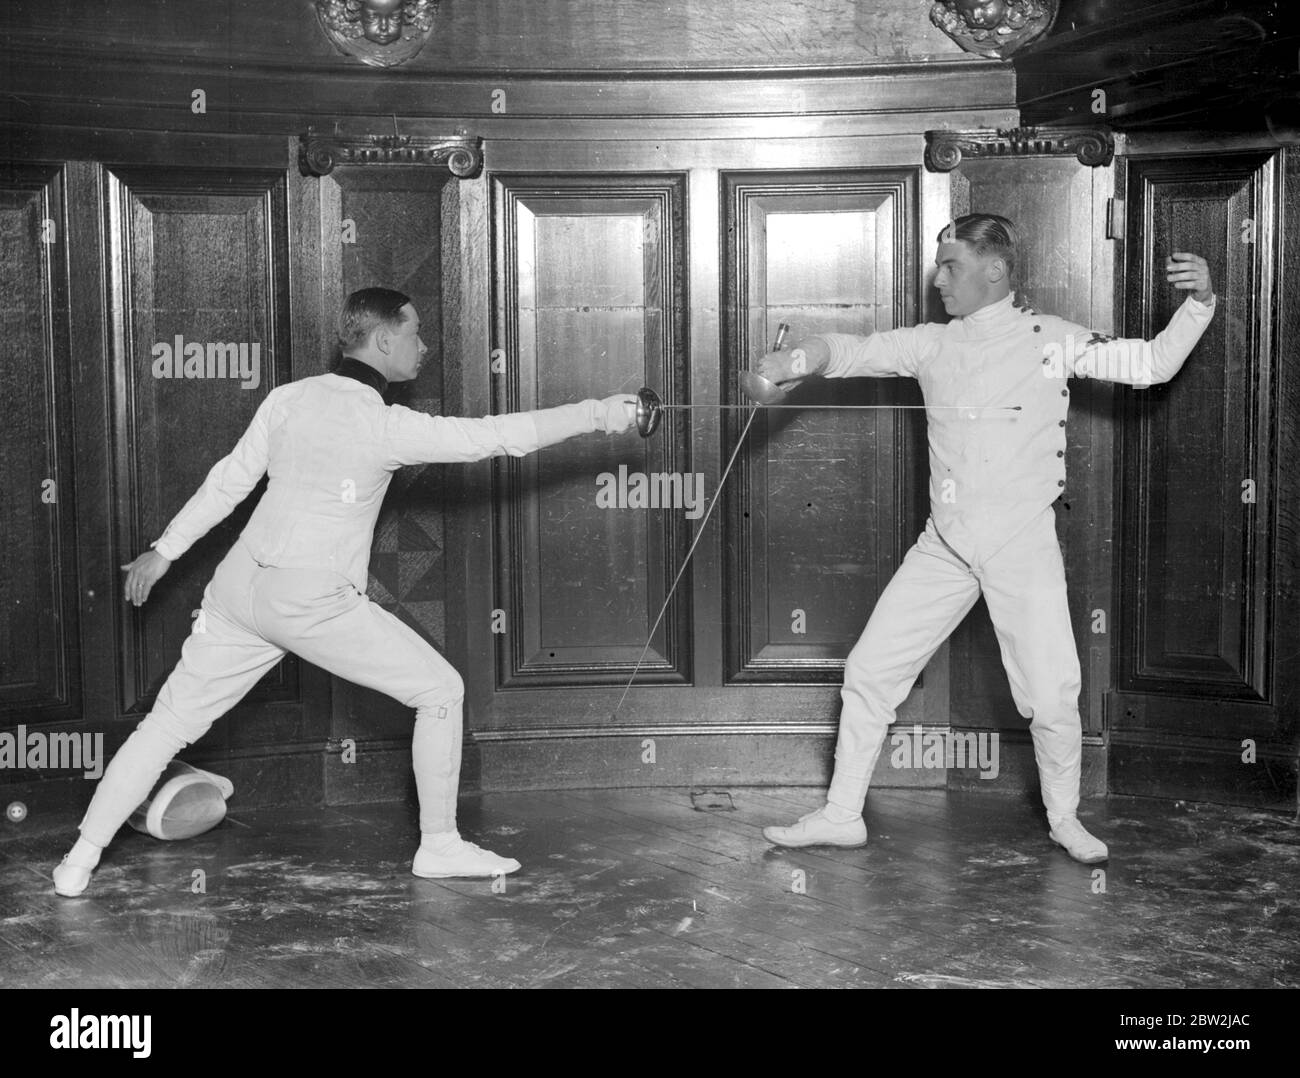 Fencing display at the Aeolian Hall arranged by Professor Felix Grave. Professor E. Froeschlen and R.C. Lewis Stroud. undated Stock Photo